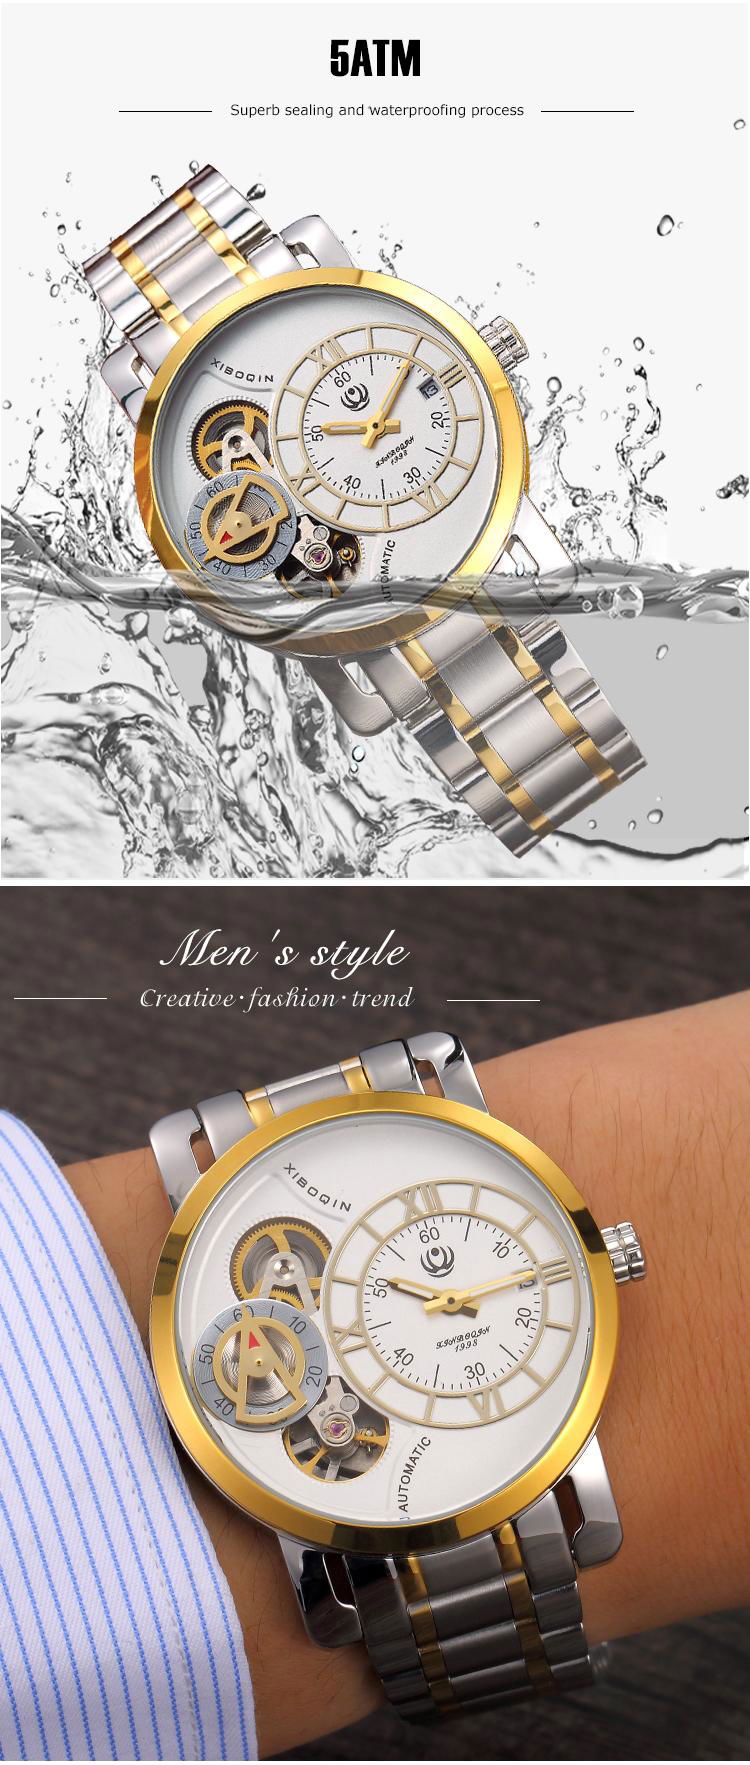 XINBOQIN Wholesale Two Movement Stainless Steel Water Proof Men's Watches 3